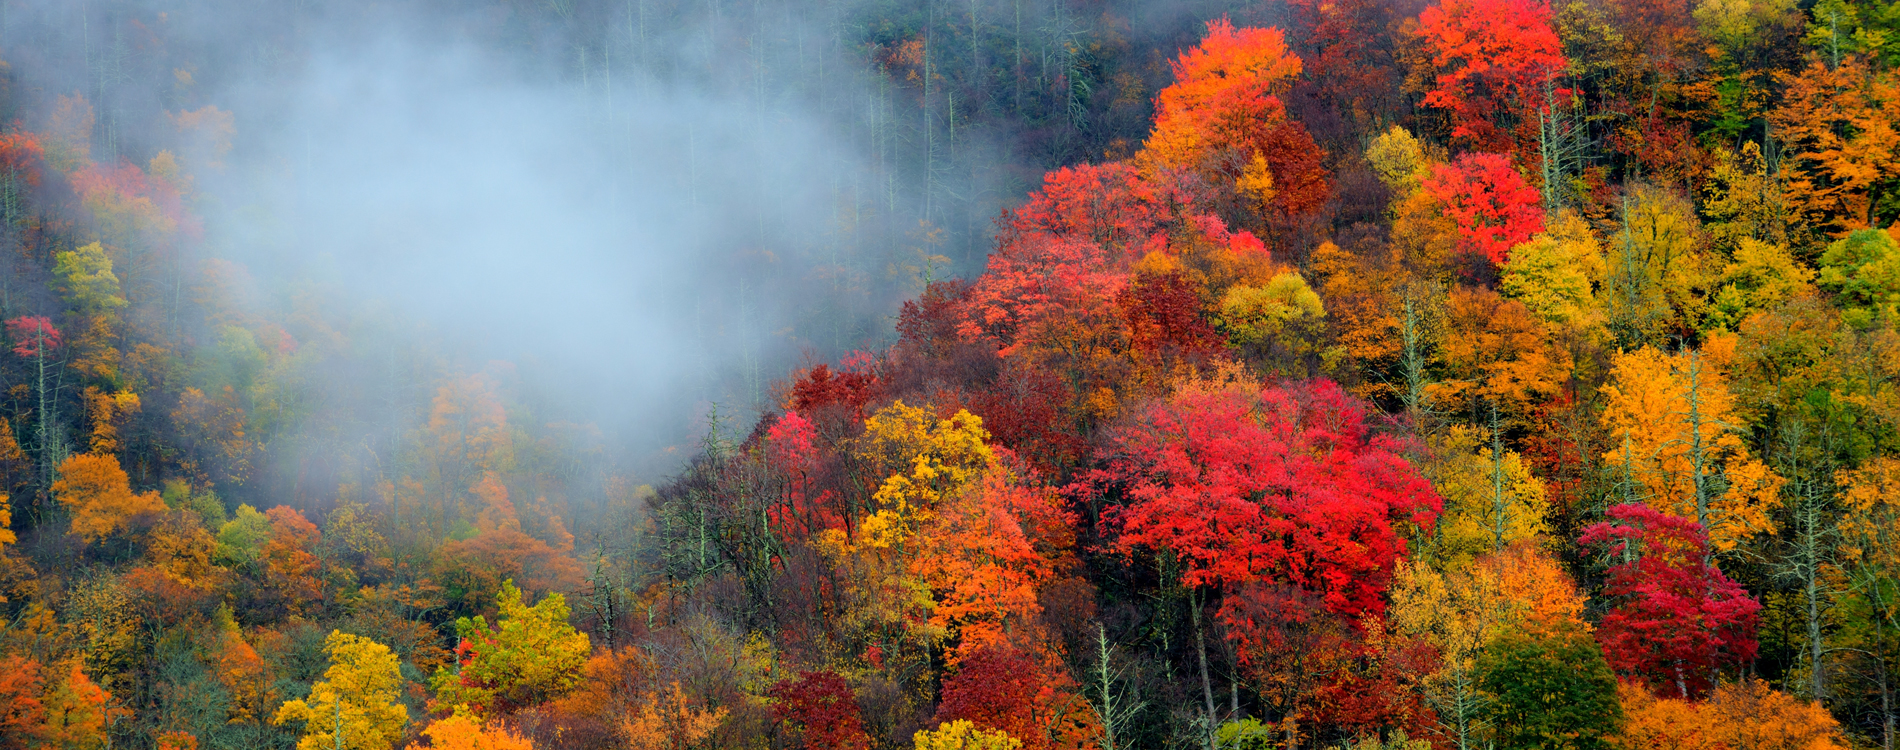 Pigeon Forge, TN - Fall Colors at Morton Overlook